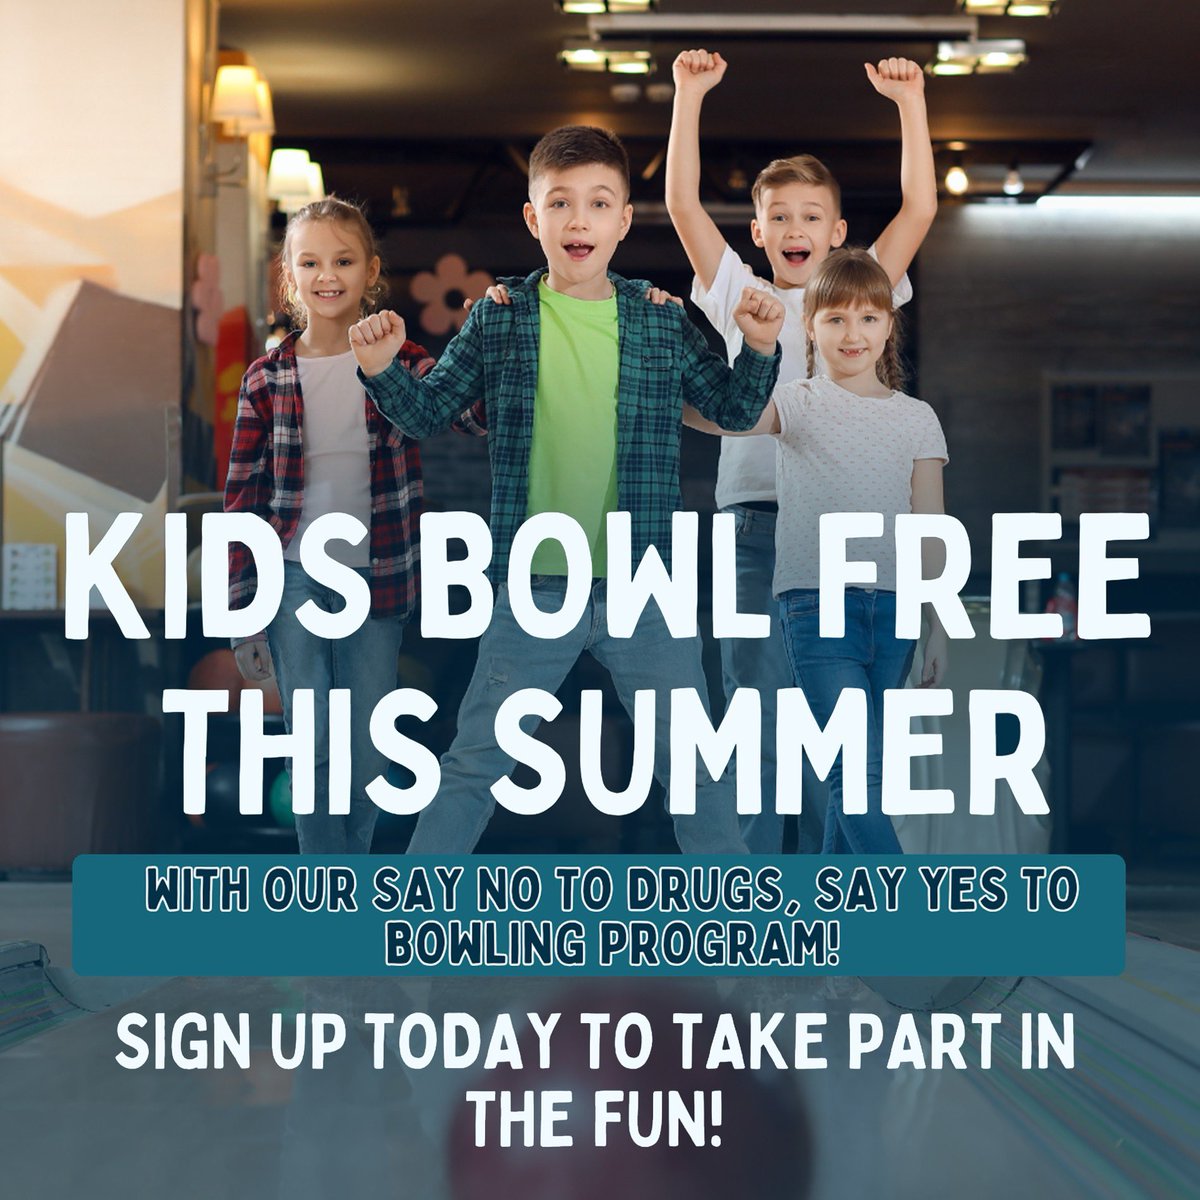 Join us for an unforgettable summer at Back Alley Bowling! Kids age 14 and under bowl one game FREE every day 6/3 - 8/23 with our Kids Summer Pass! Additional games can be purchased for just $1 each. SIGN UP HERE: bit.ly/BABKidsSummerP…